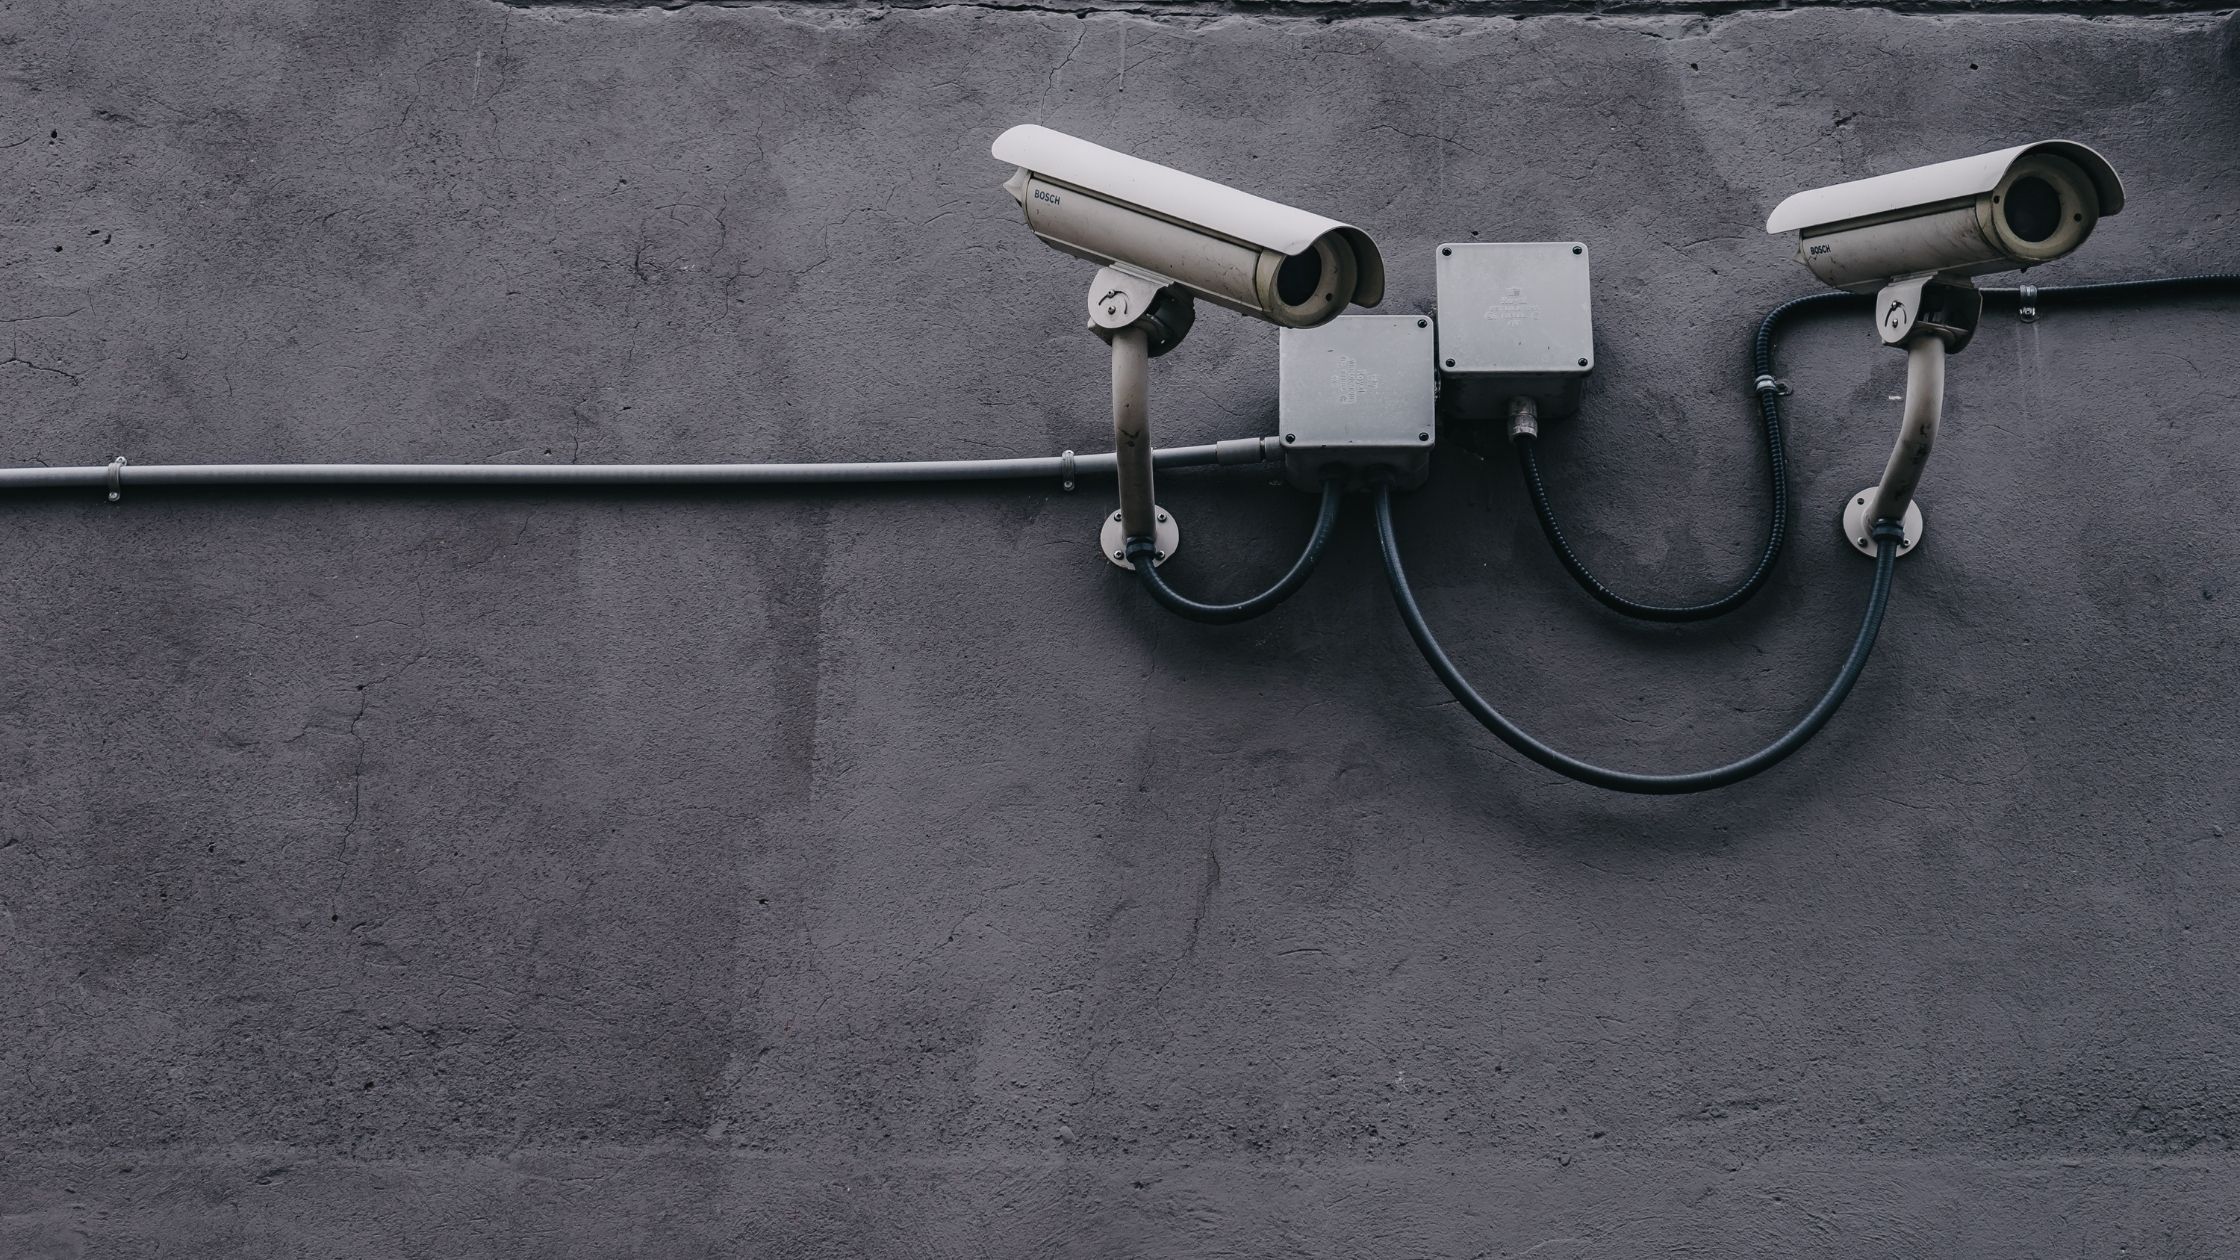 A pair of security cameras are mounted on a wall.